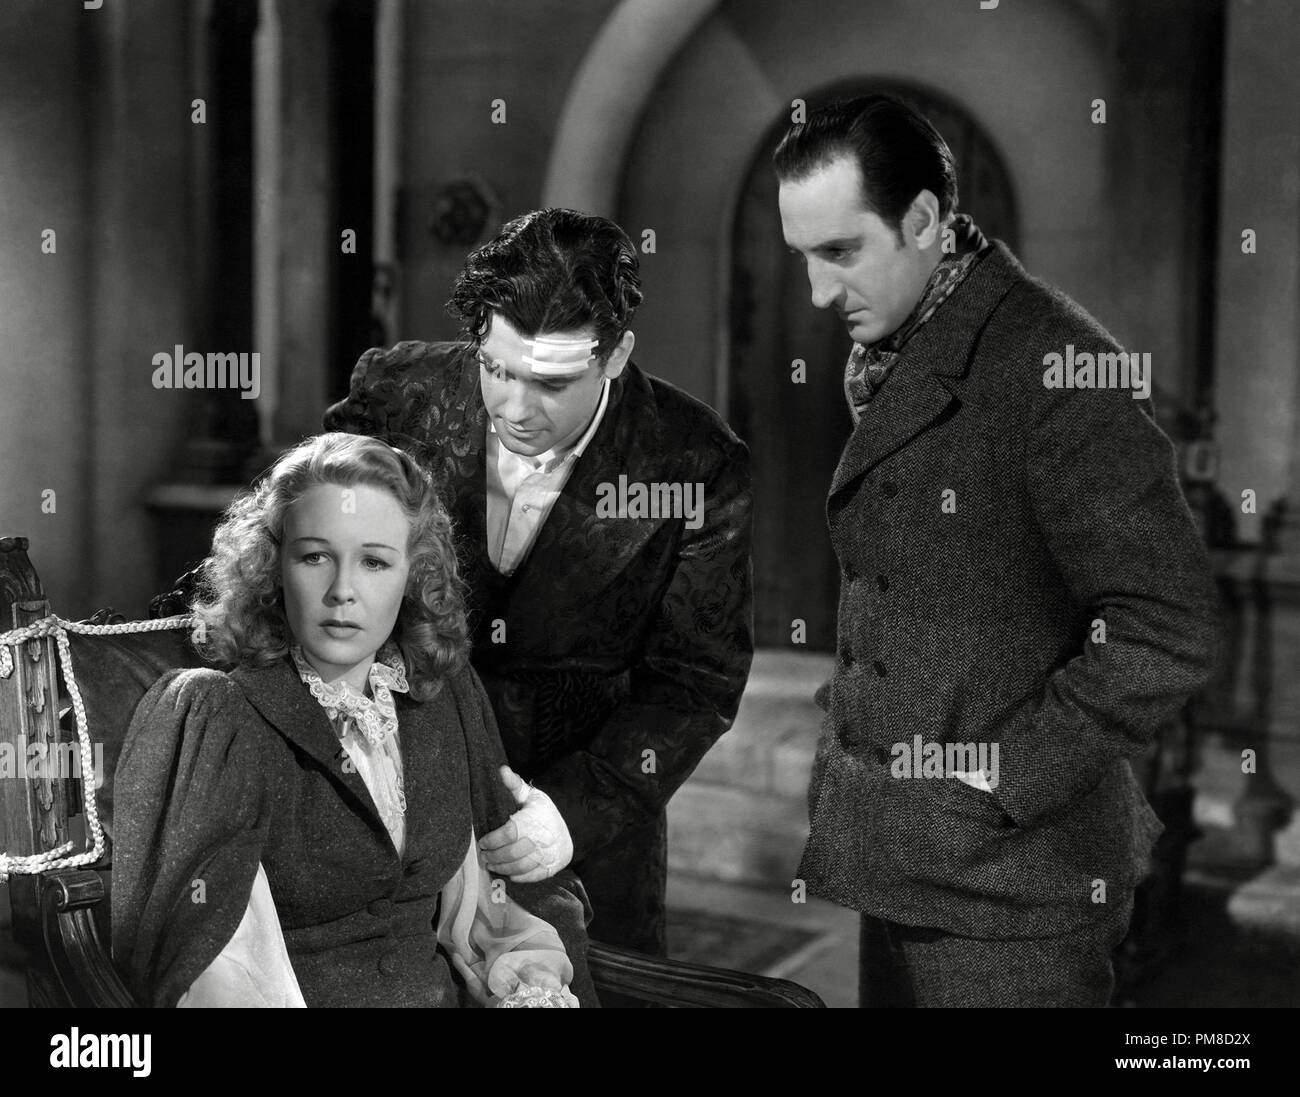 Wendy Barrie and Basil Rathbone, 'Hound of the Baskervilles' 1939 20th Century Fox     File Reference # 31955 233THA Stock Photo